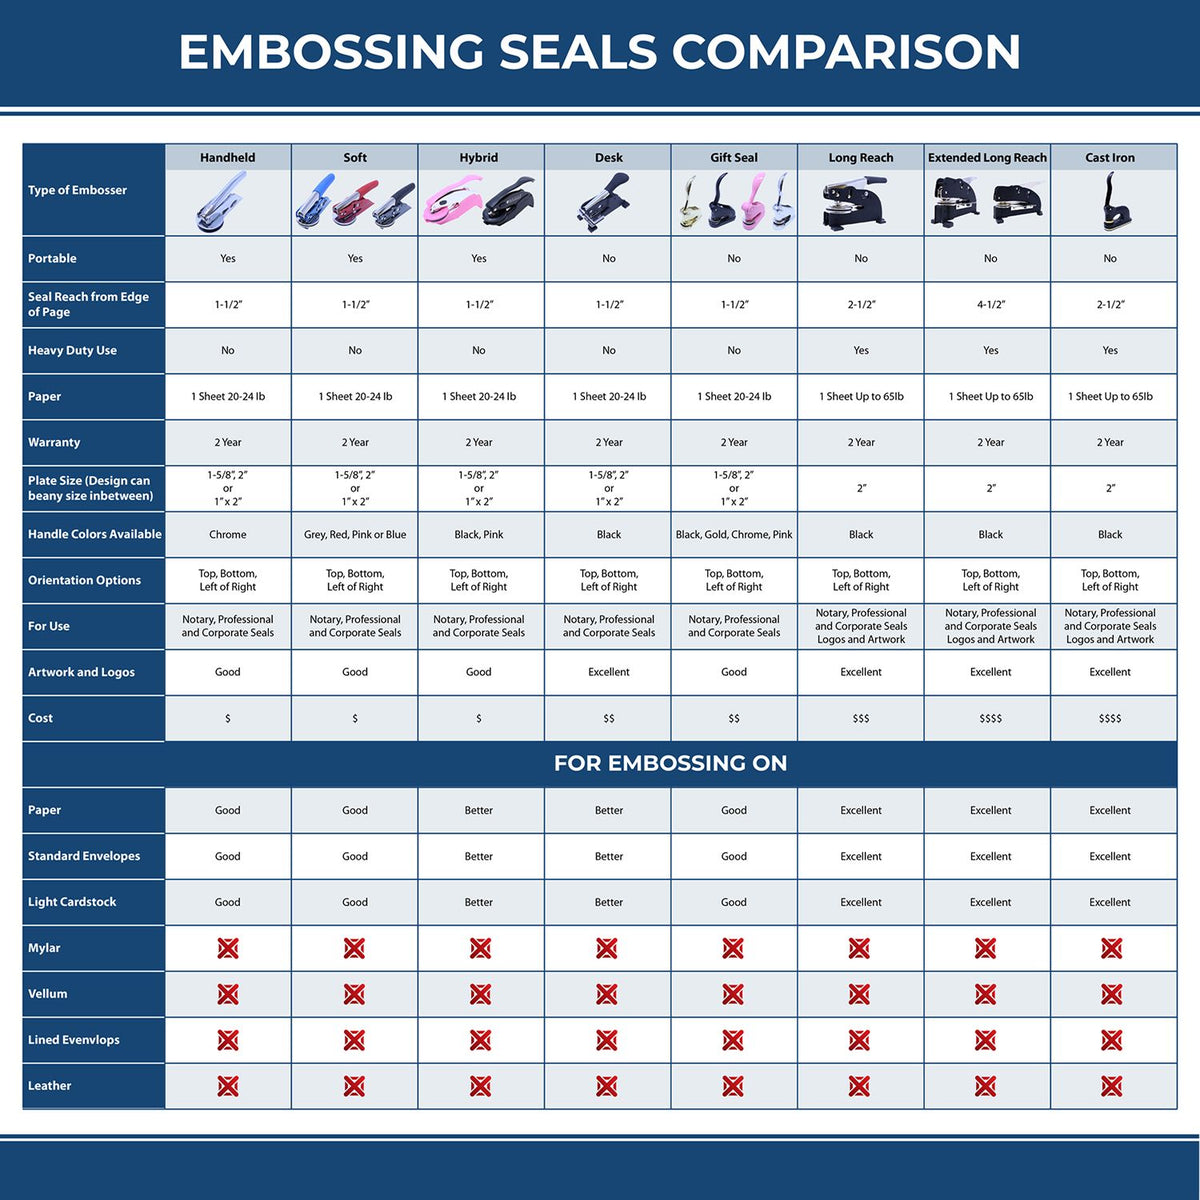 A comparison chart for the different types of mount models available for the Hybrid Iowa Land Surveyor Seal